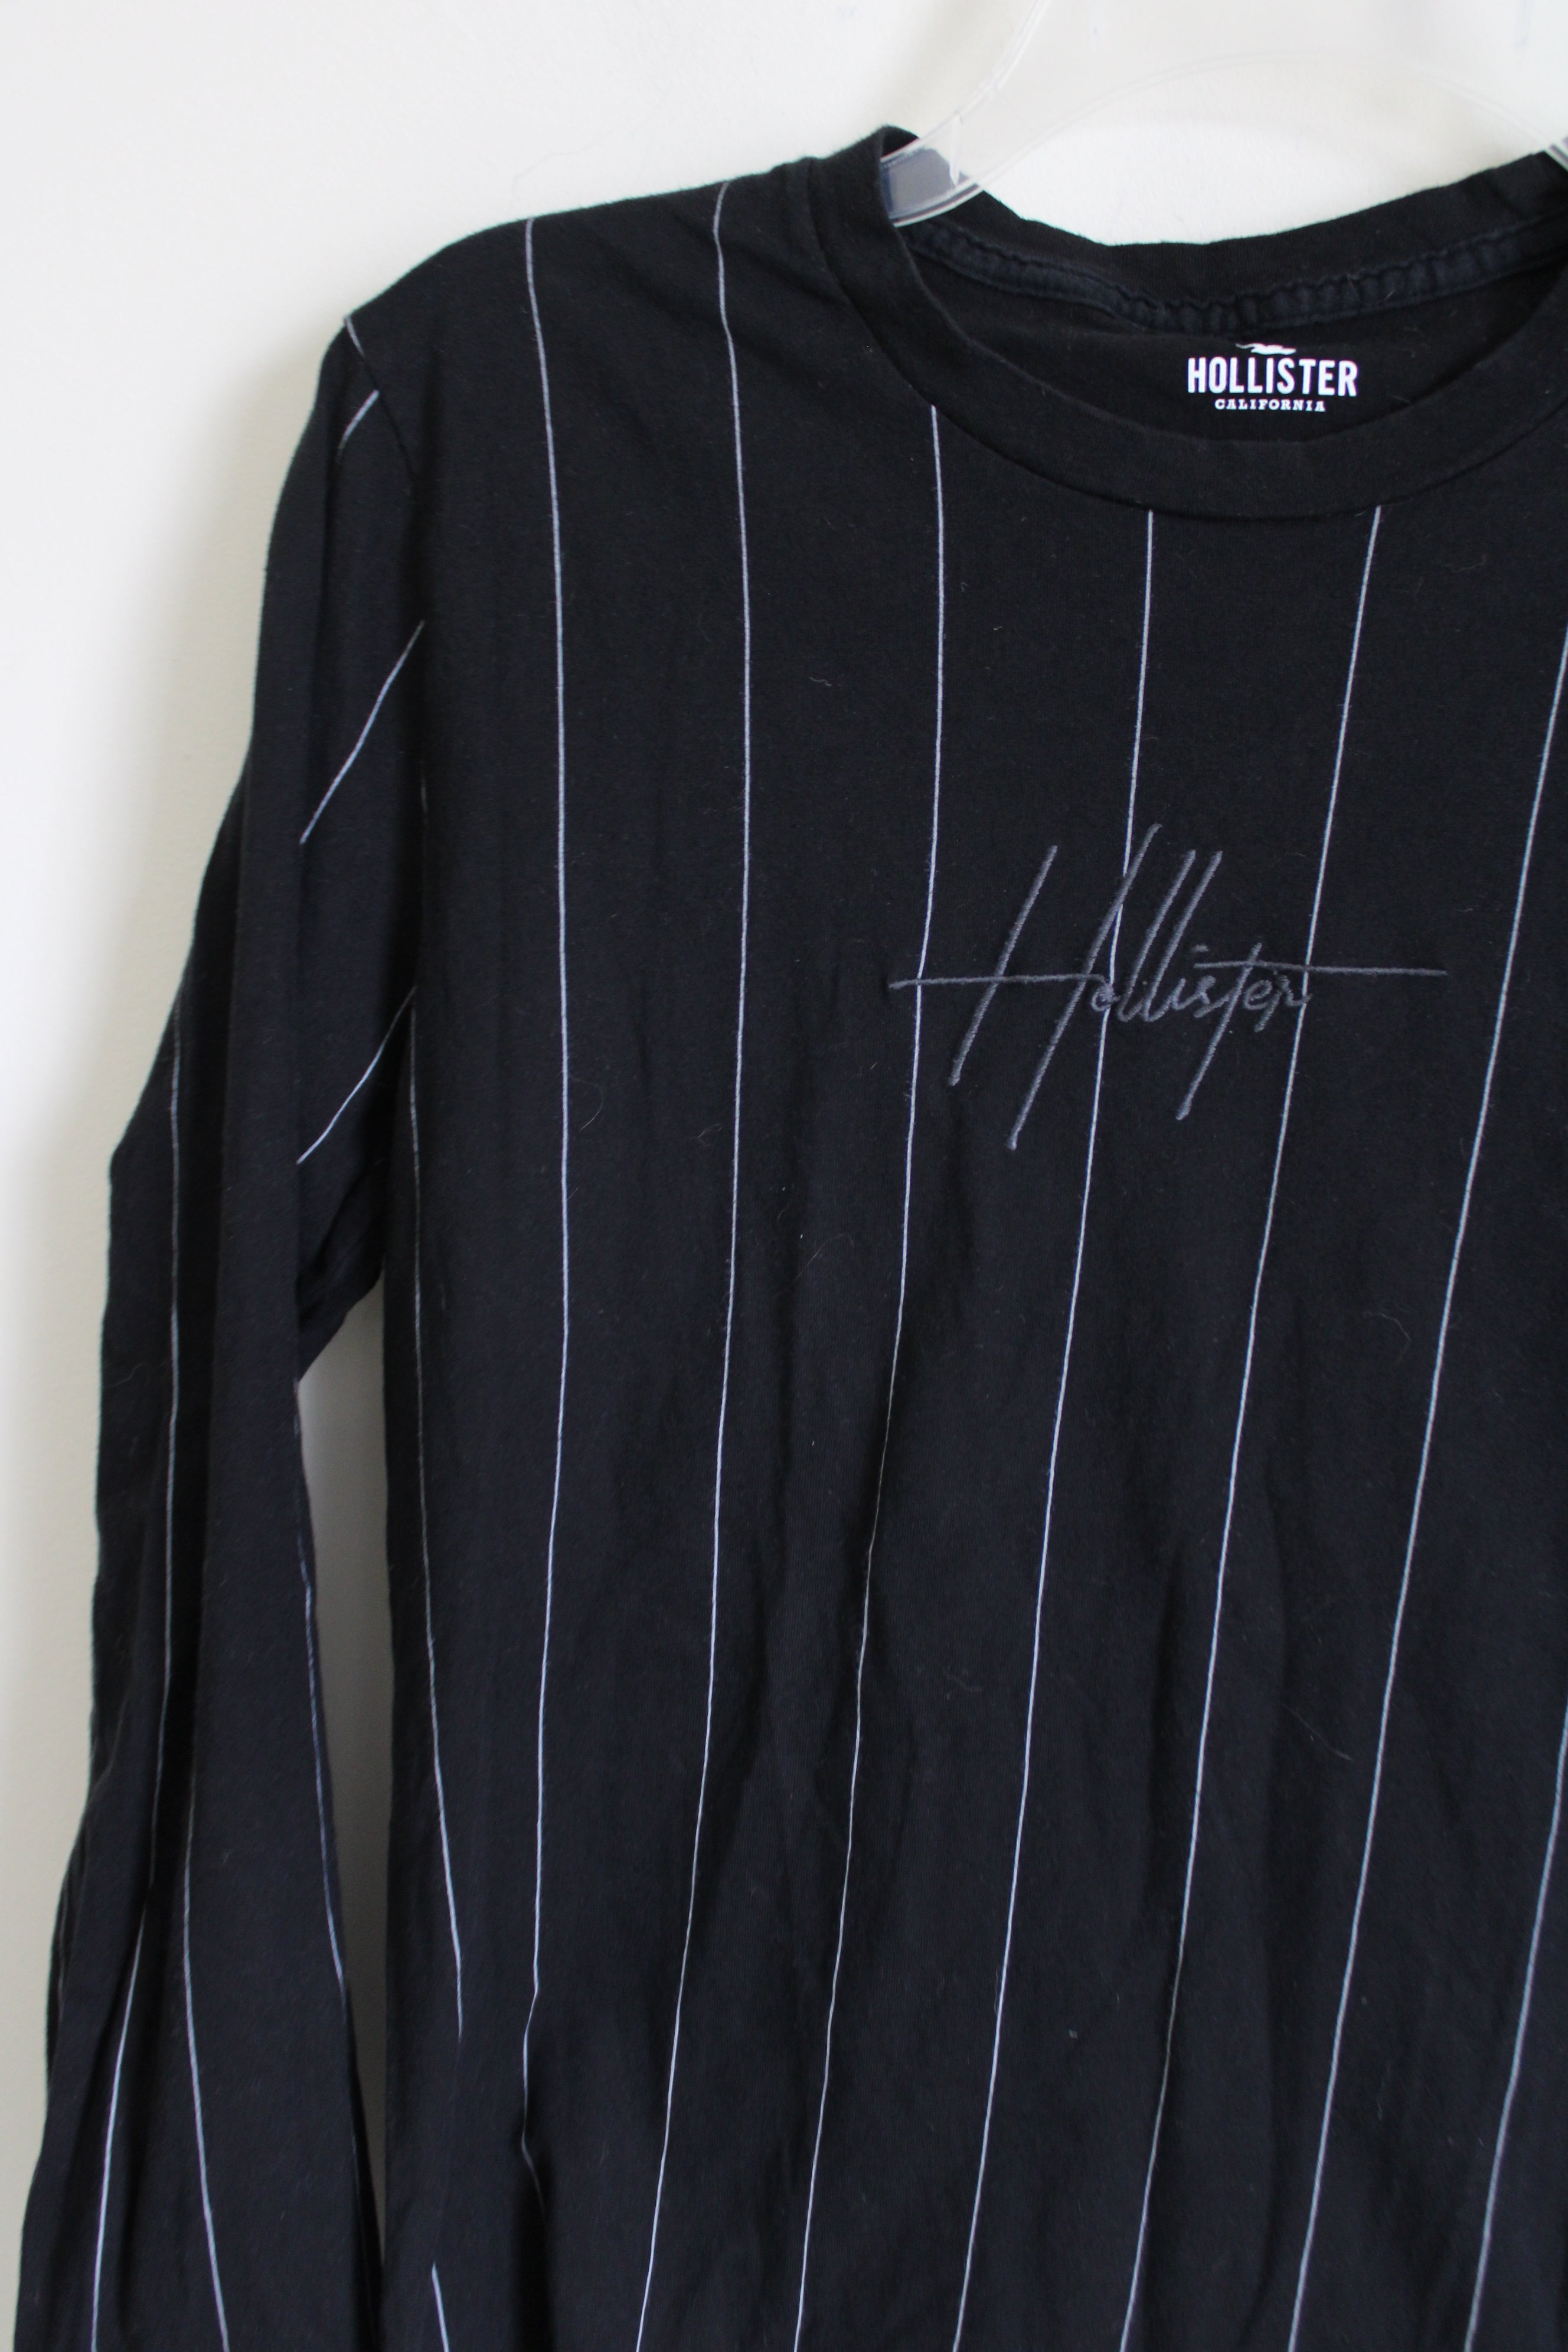 Hollister Black Striped Embroidered Long Sleeved Shirt